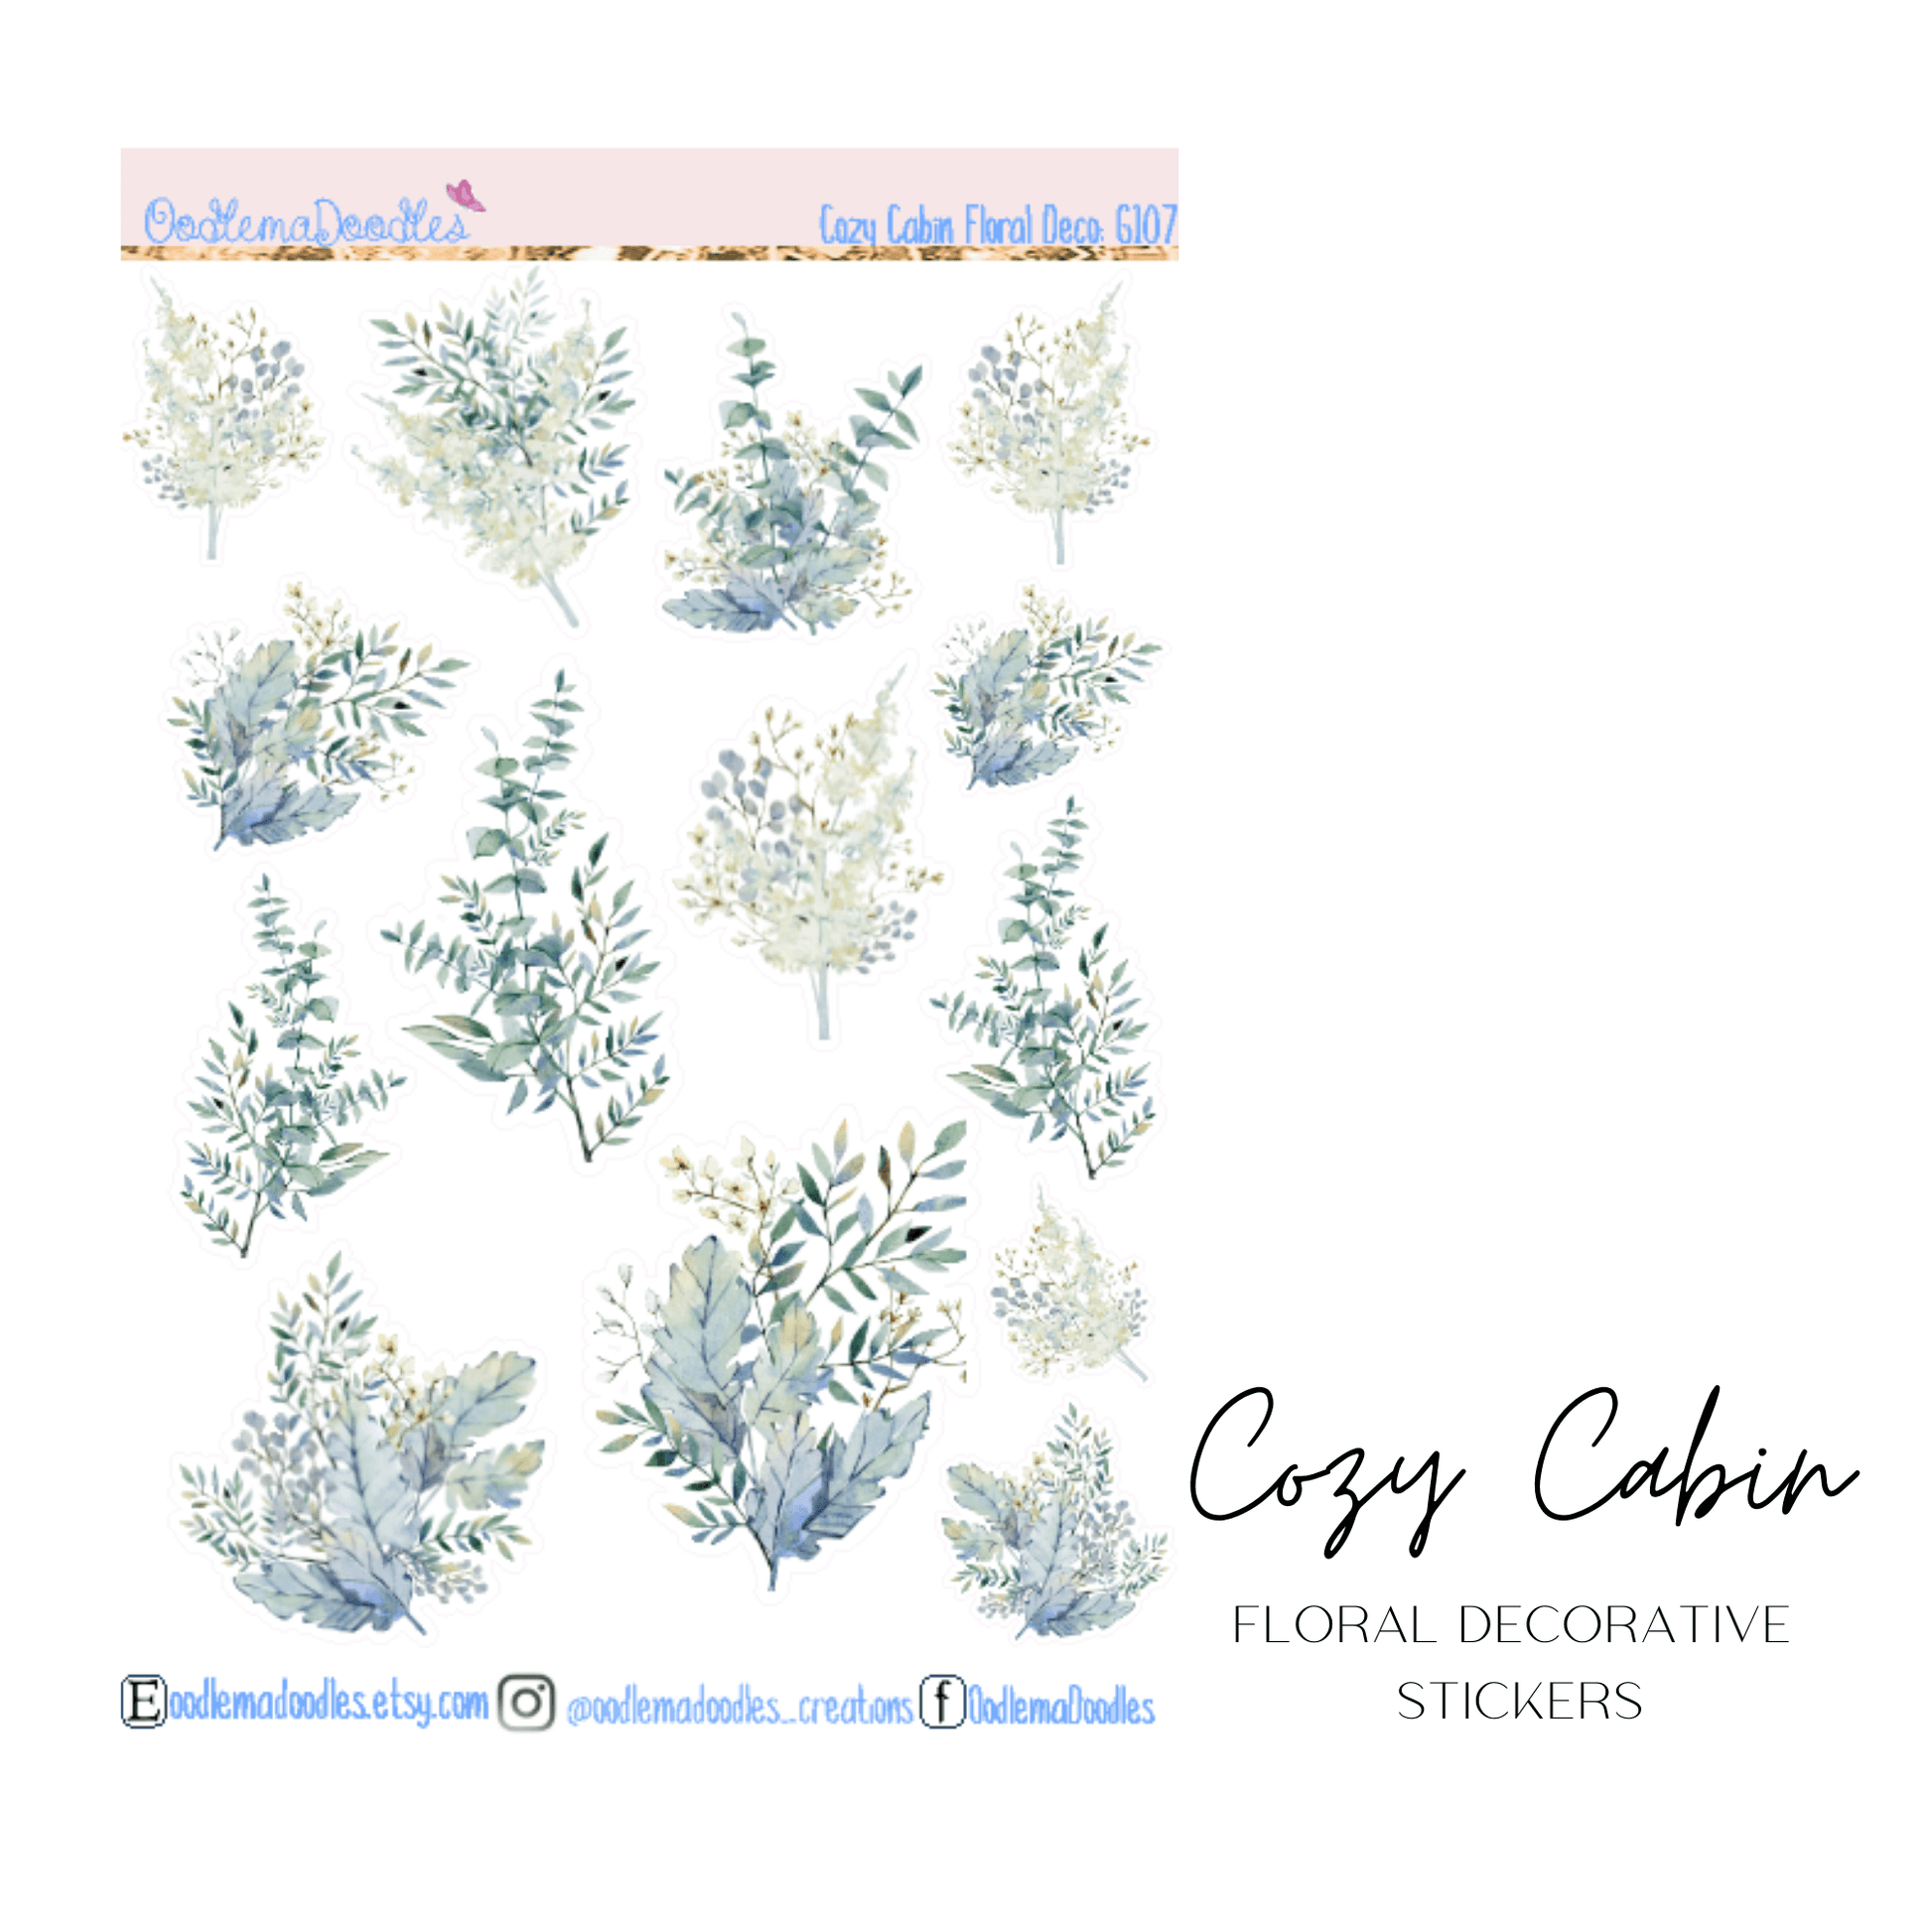 Cozy Cabin Floral Decorative Stickers - oodlemadoodles